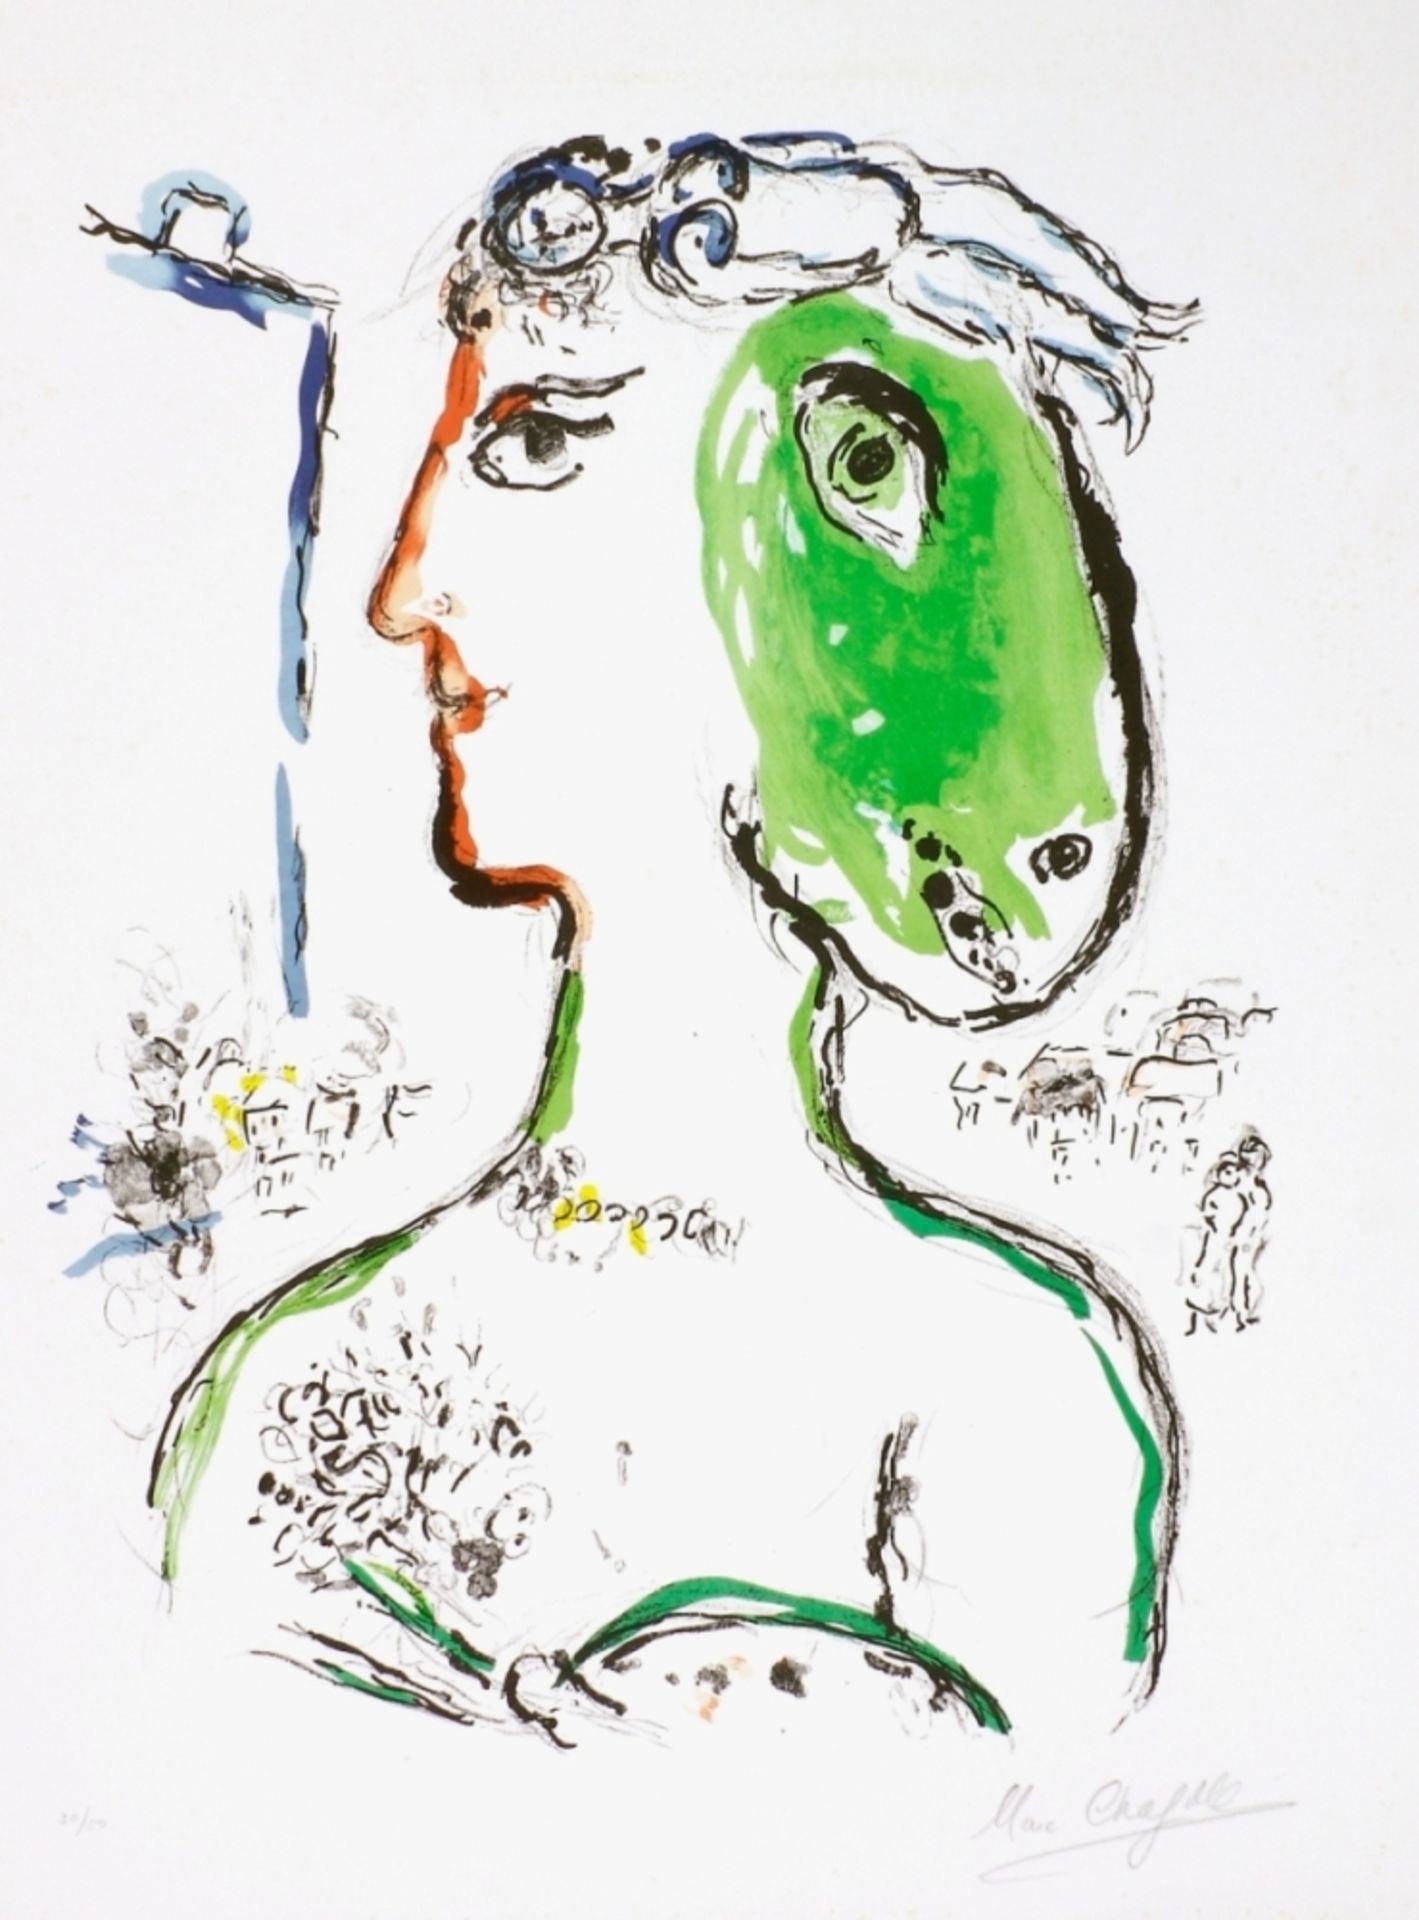 Chagall, Marc (1887 Witebsk - 1985